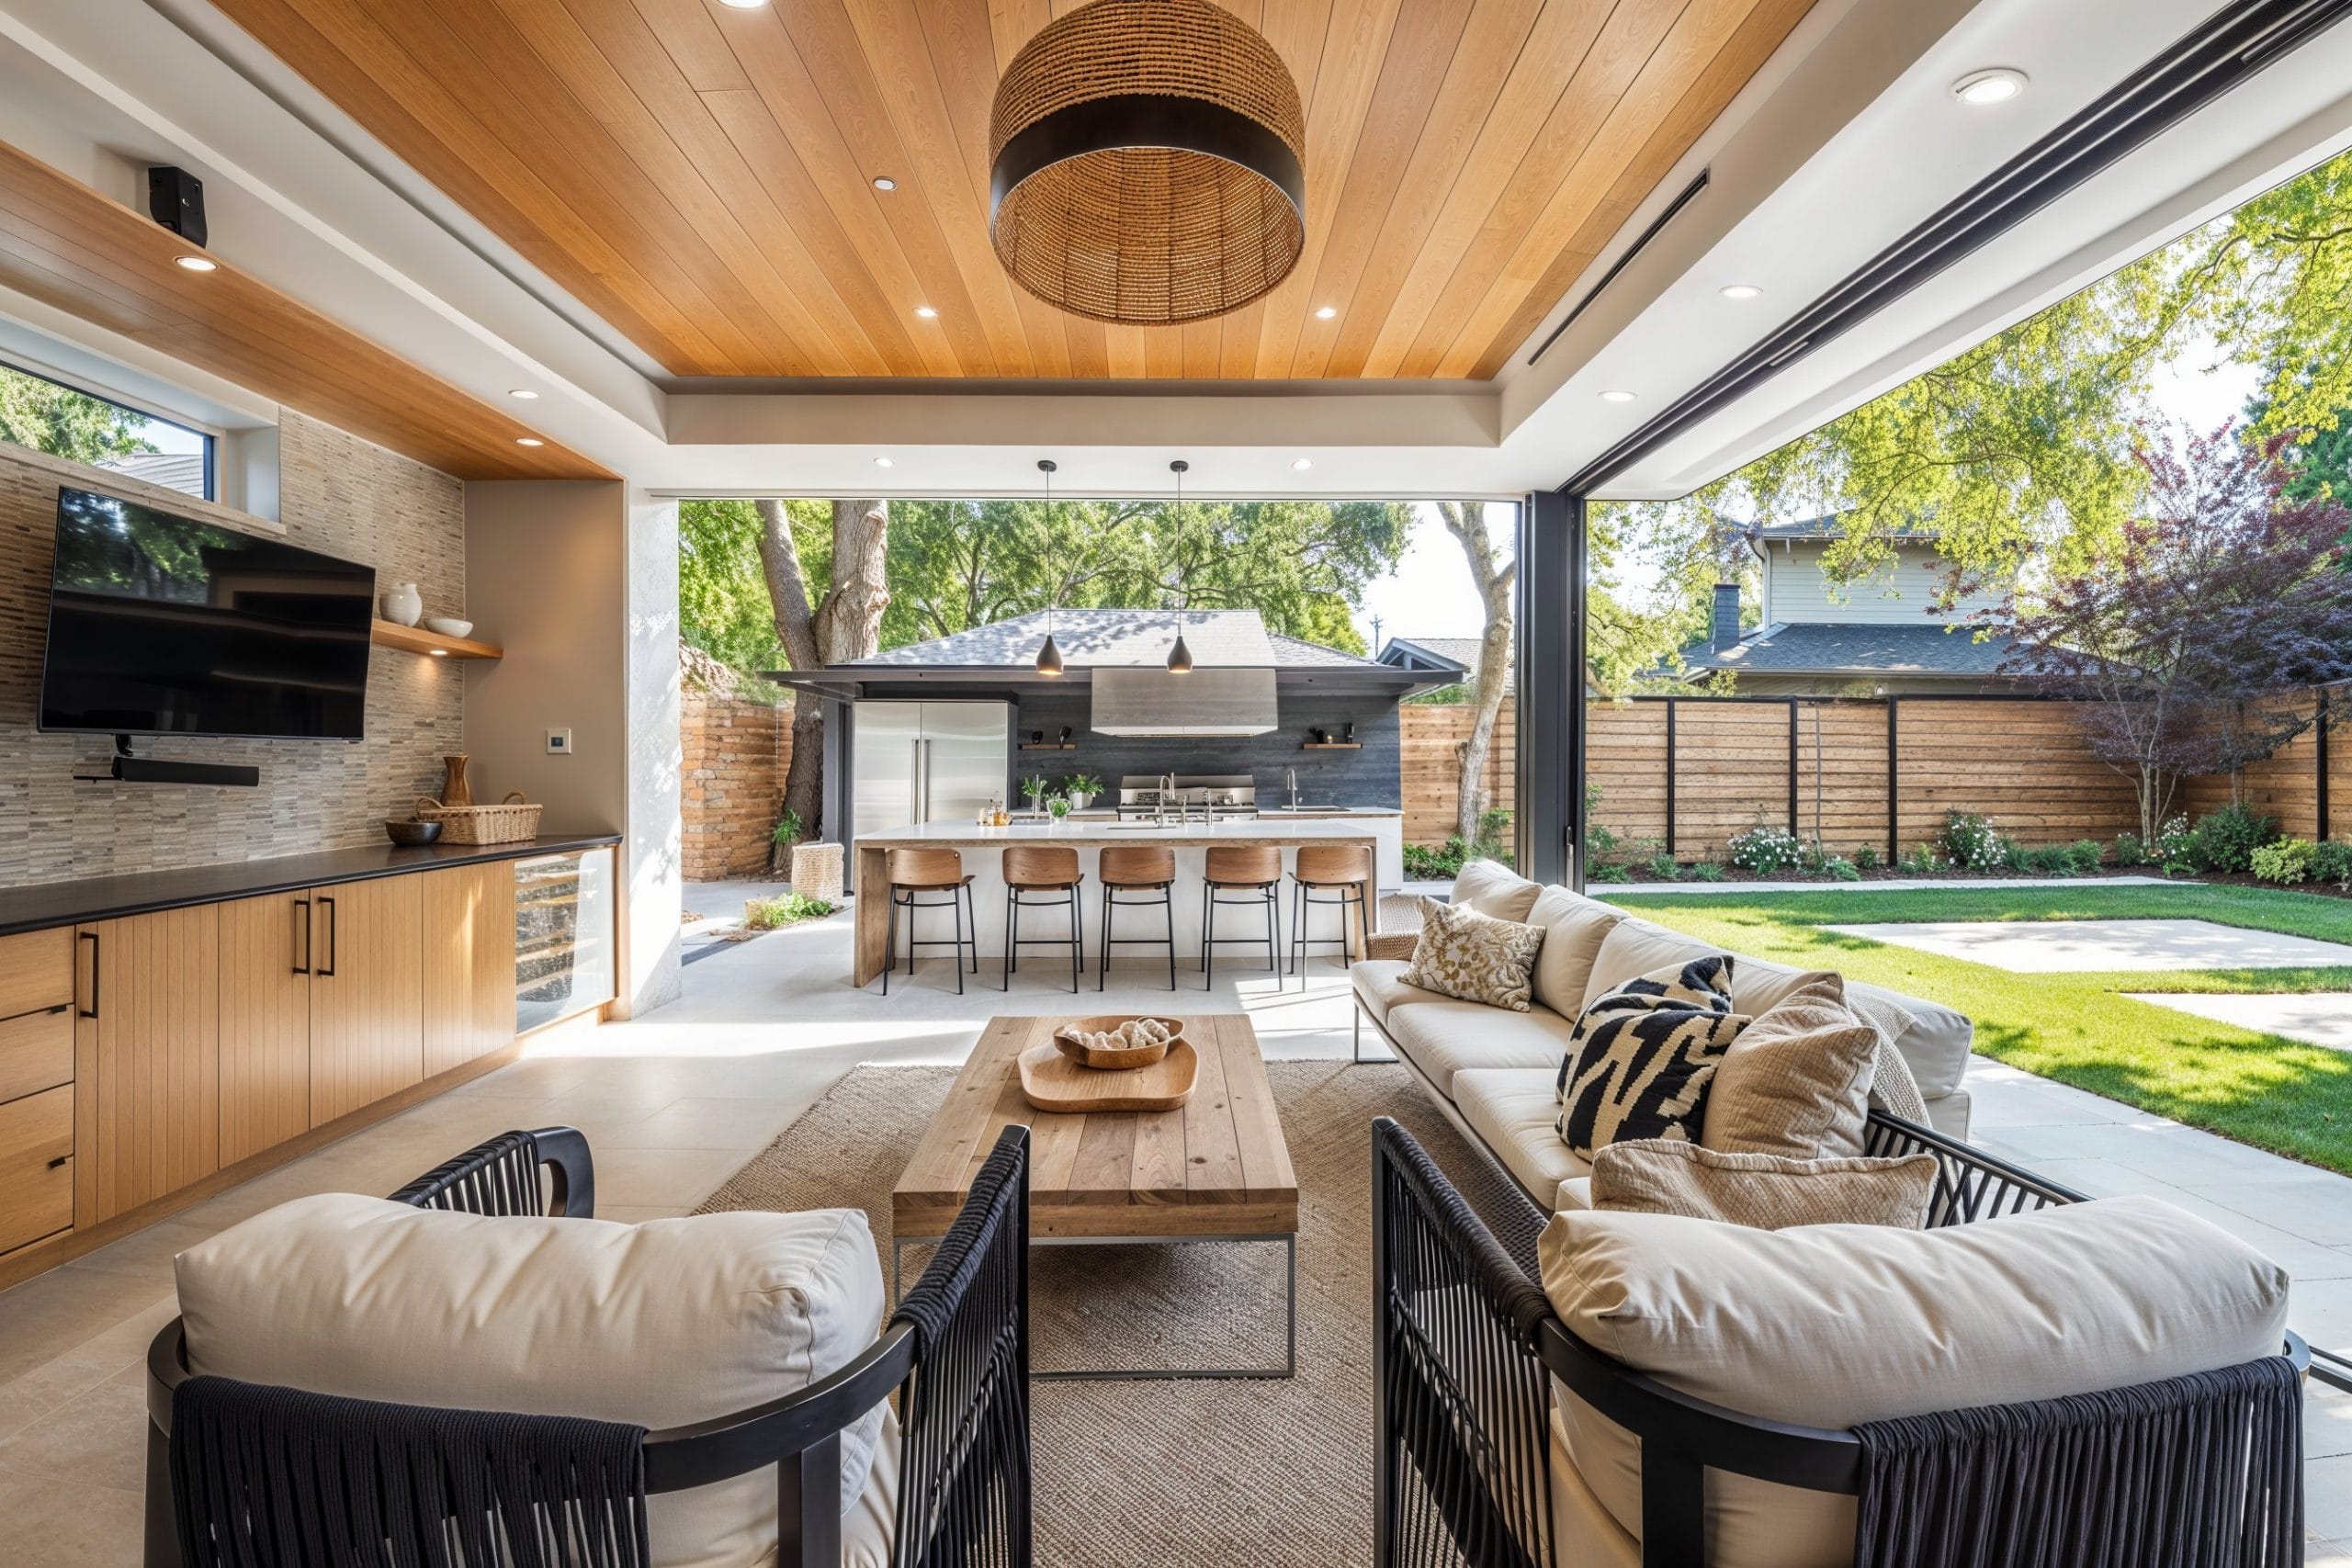 Luxury outdoor kitchen and dining with a BBQ